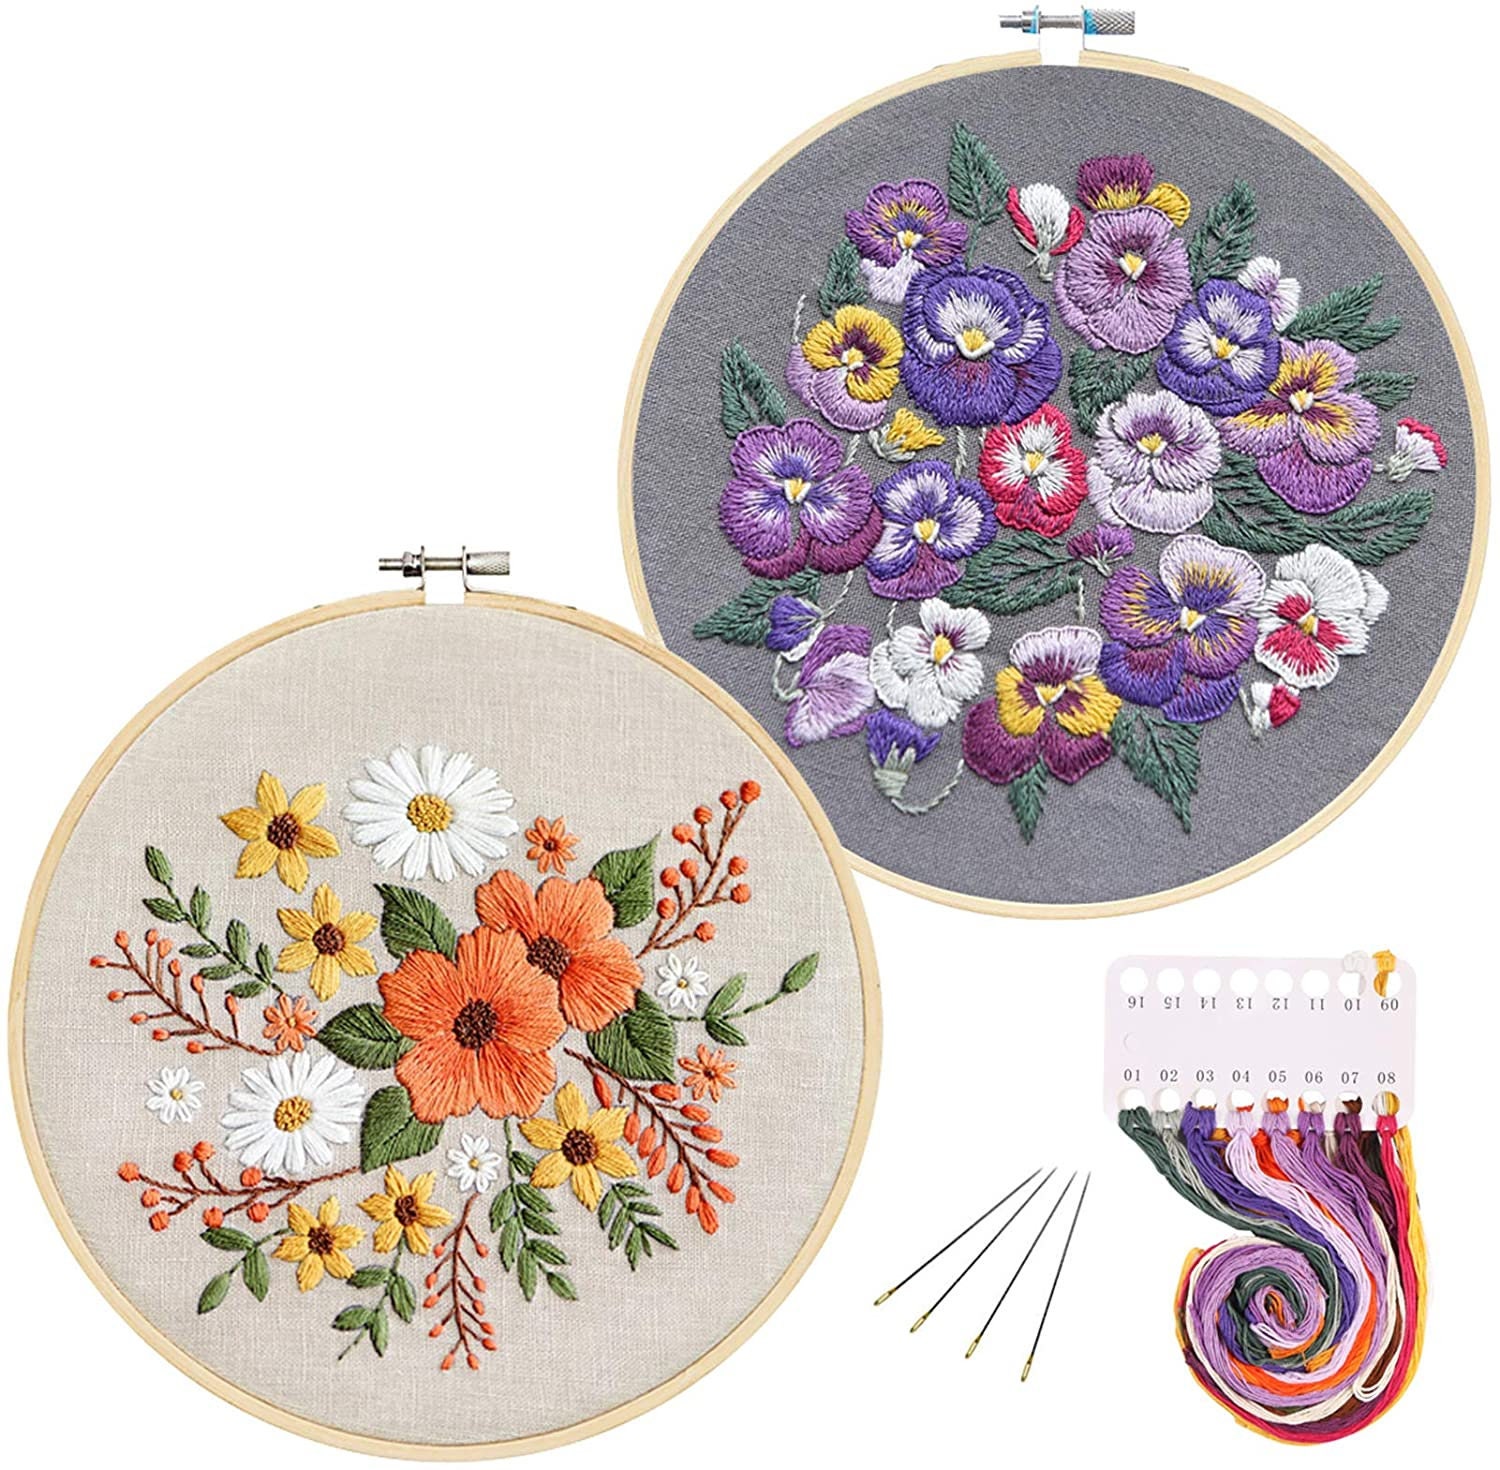 Embroidery Kit For Beginners Embroidery Starters Kit With Pattern And  Instructions Crewel Embroidery Kits For Adults Hand - AliExpress